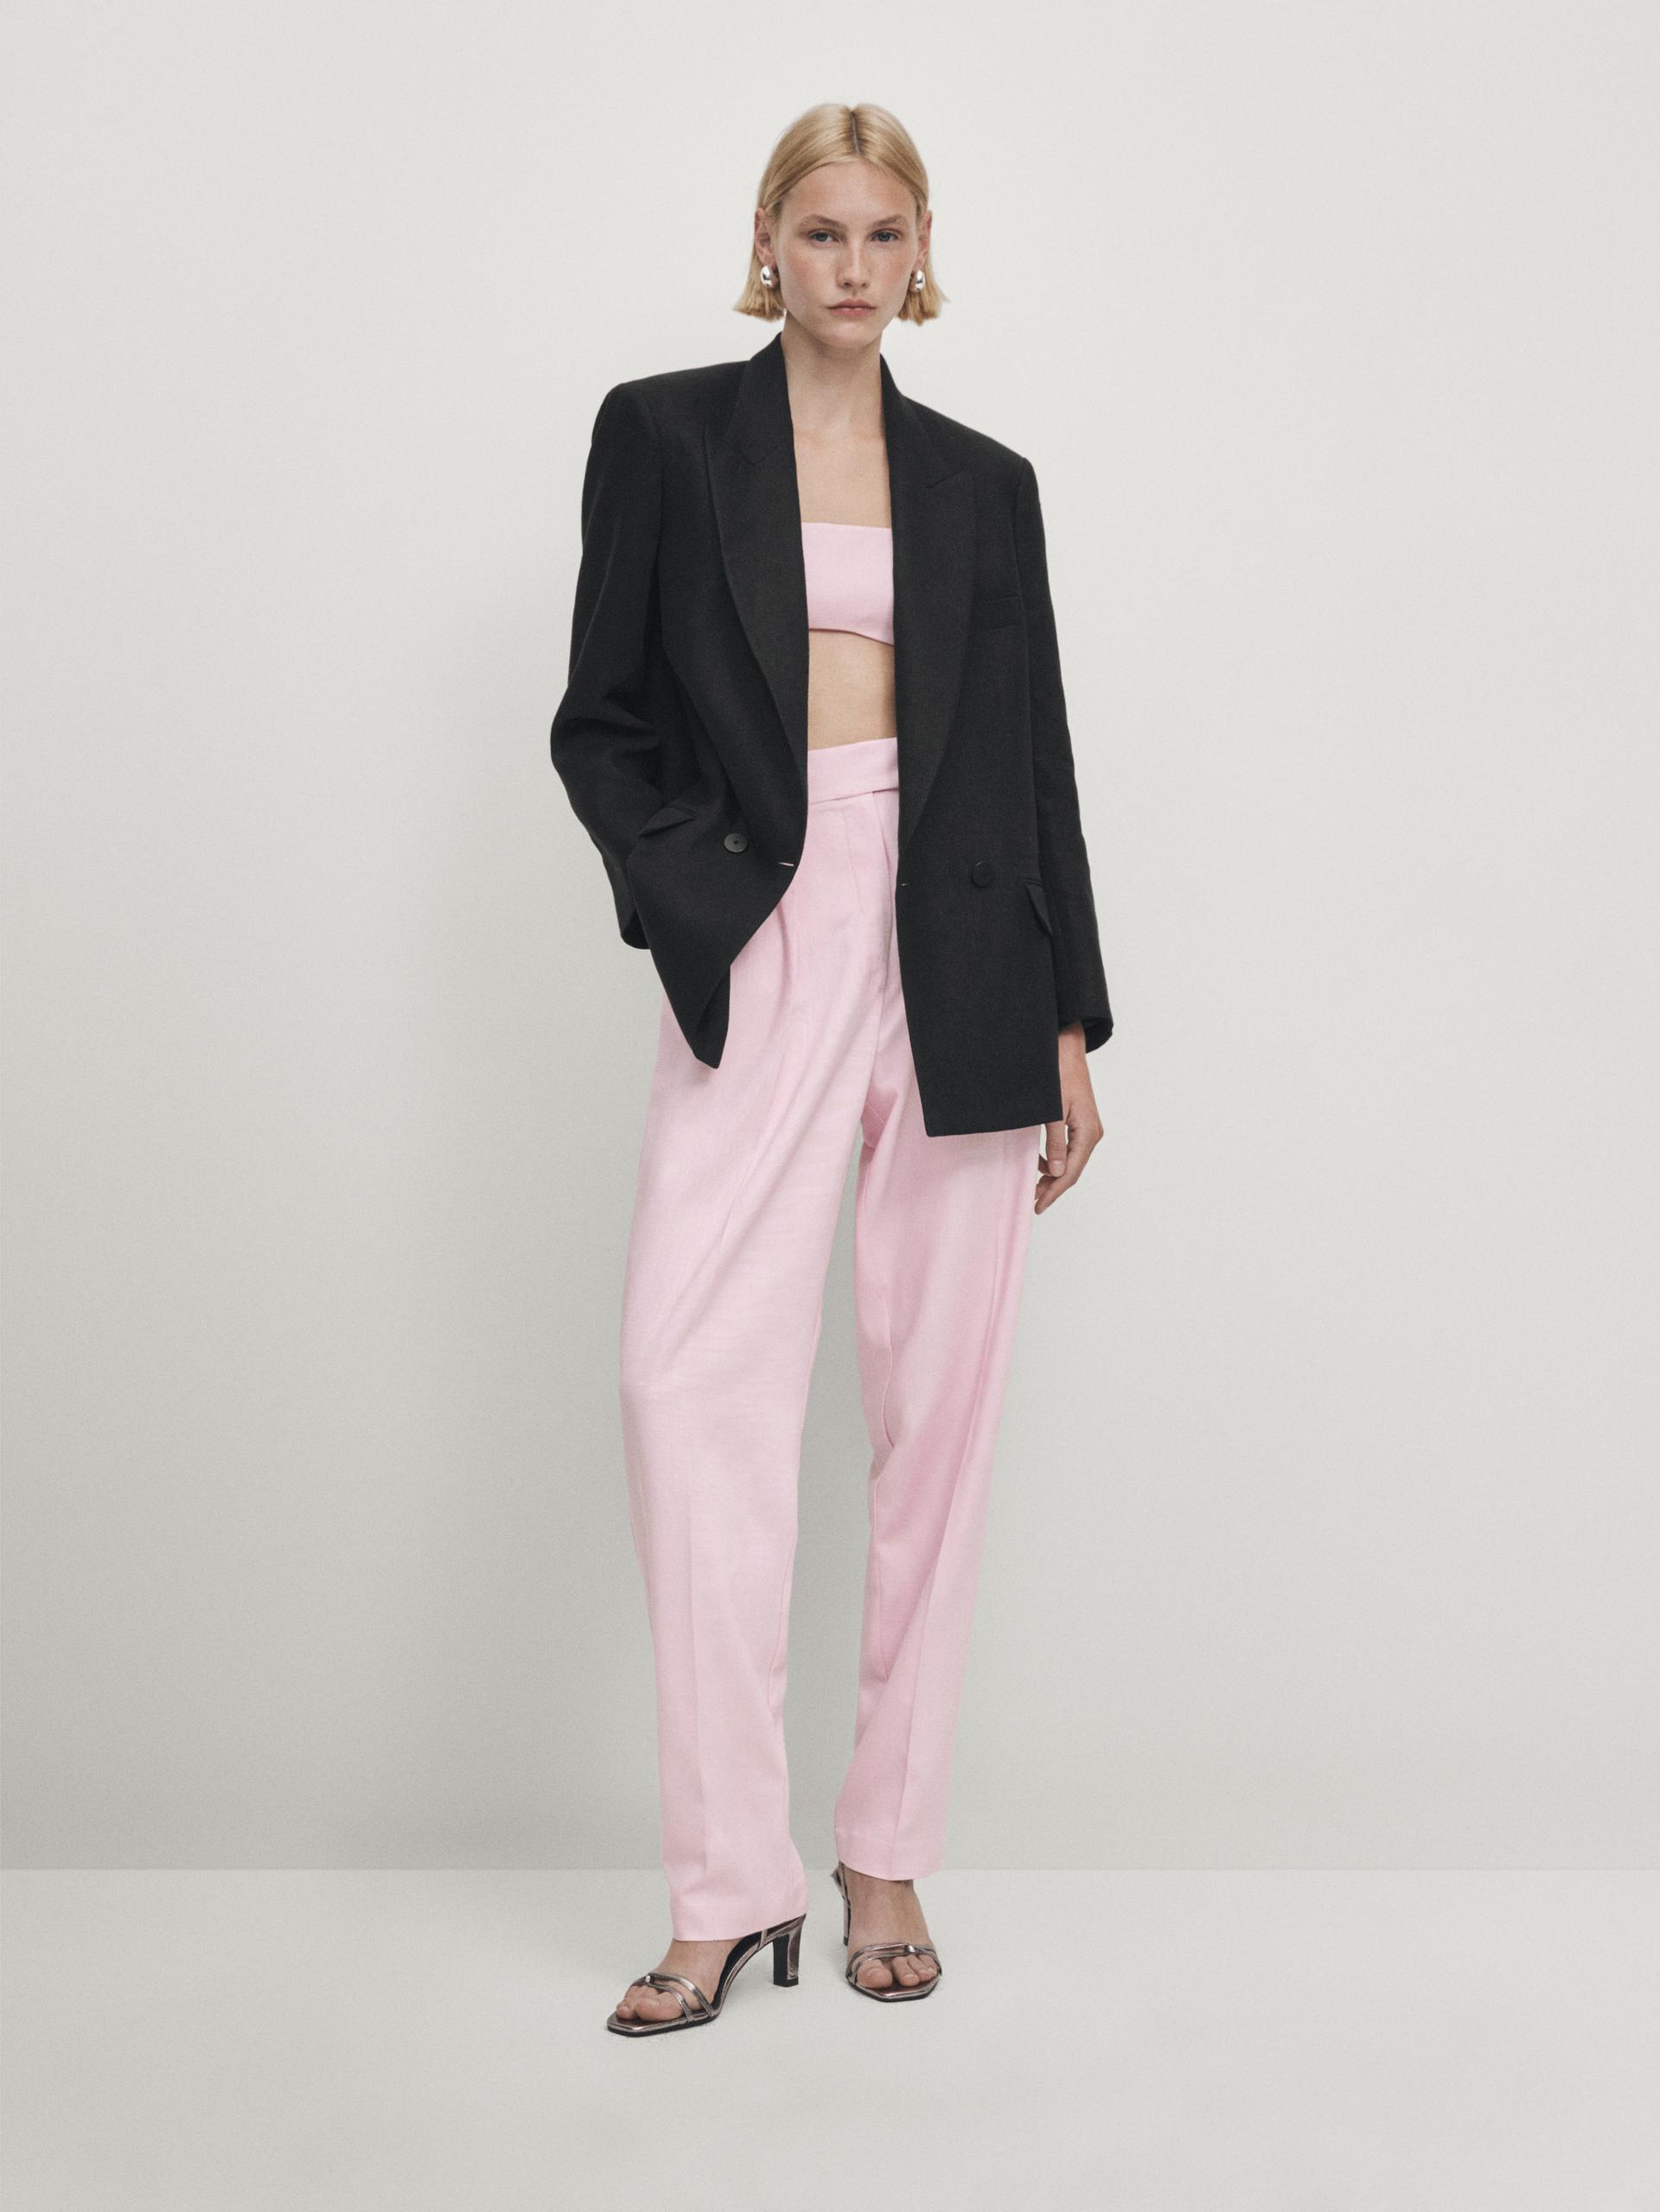 Flowing trousers with darted details - Studio ZARA